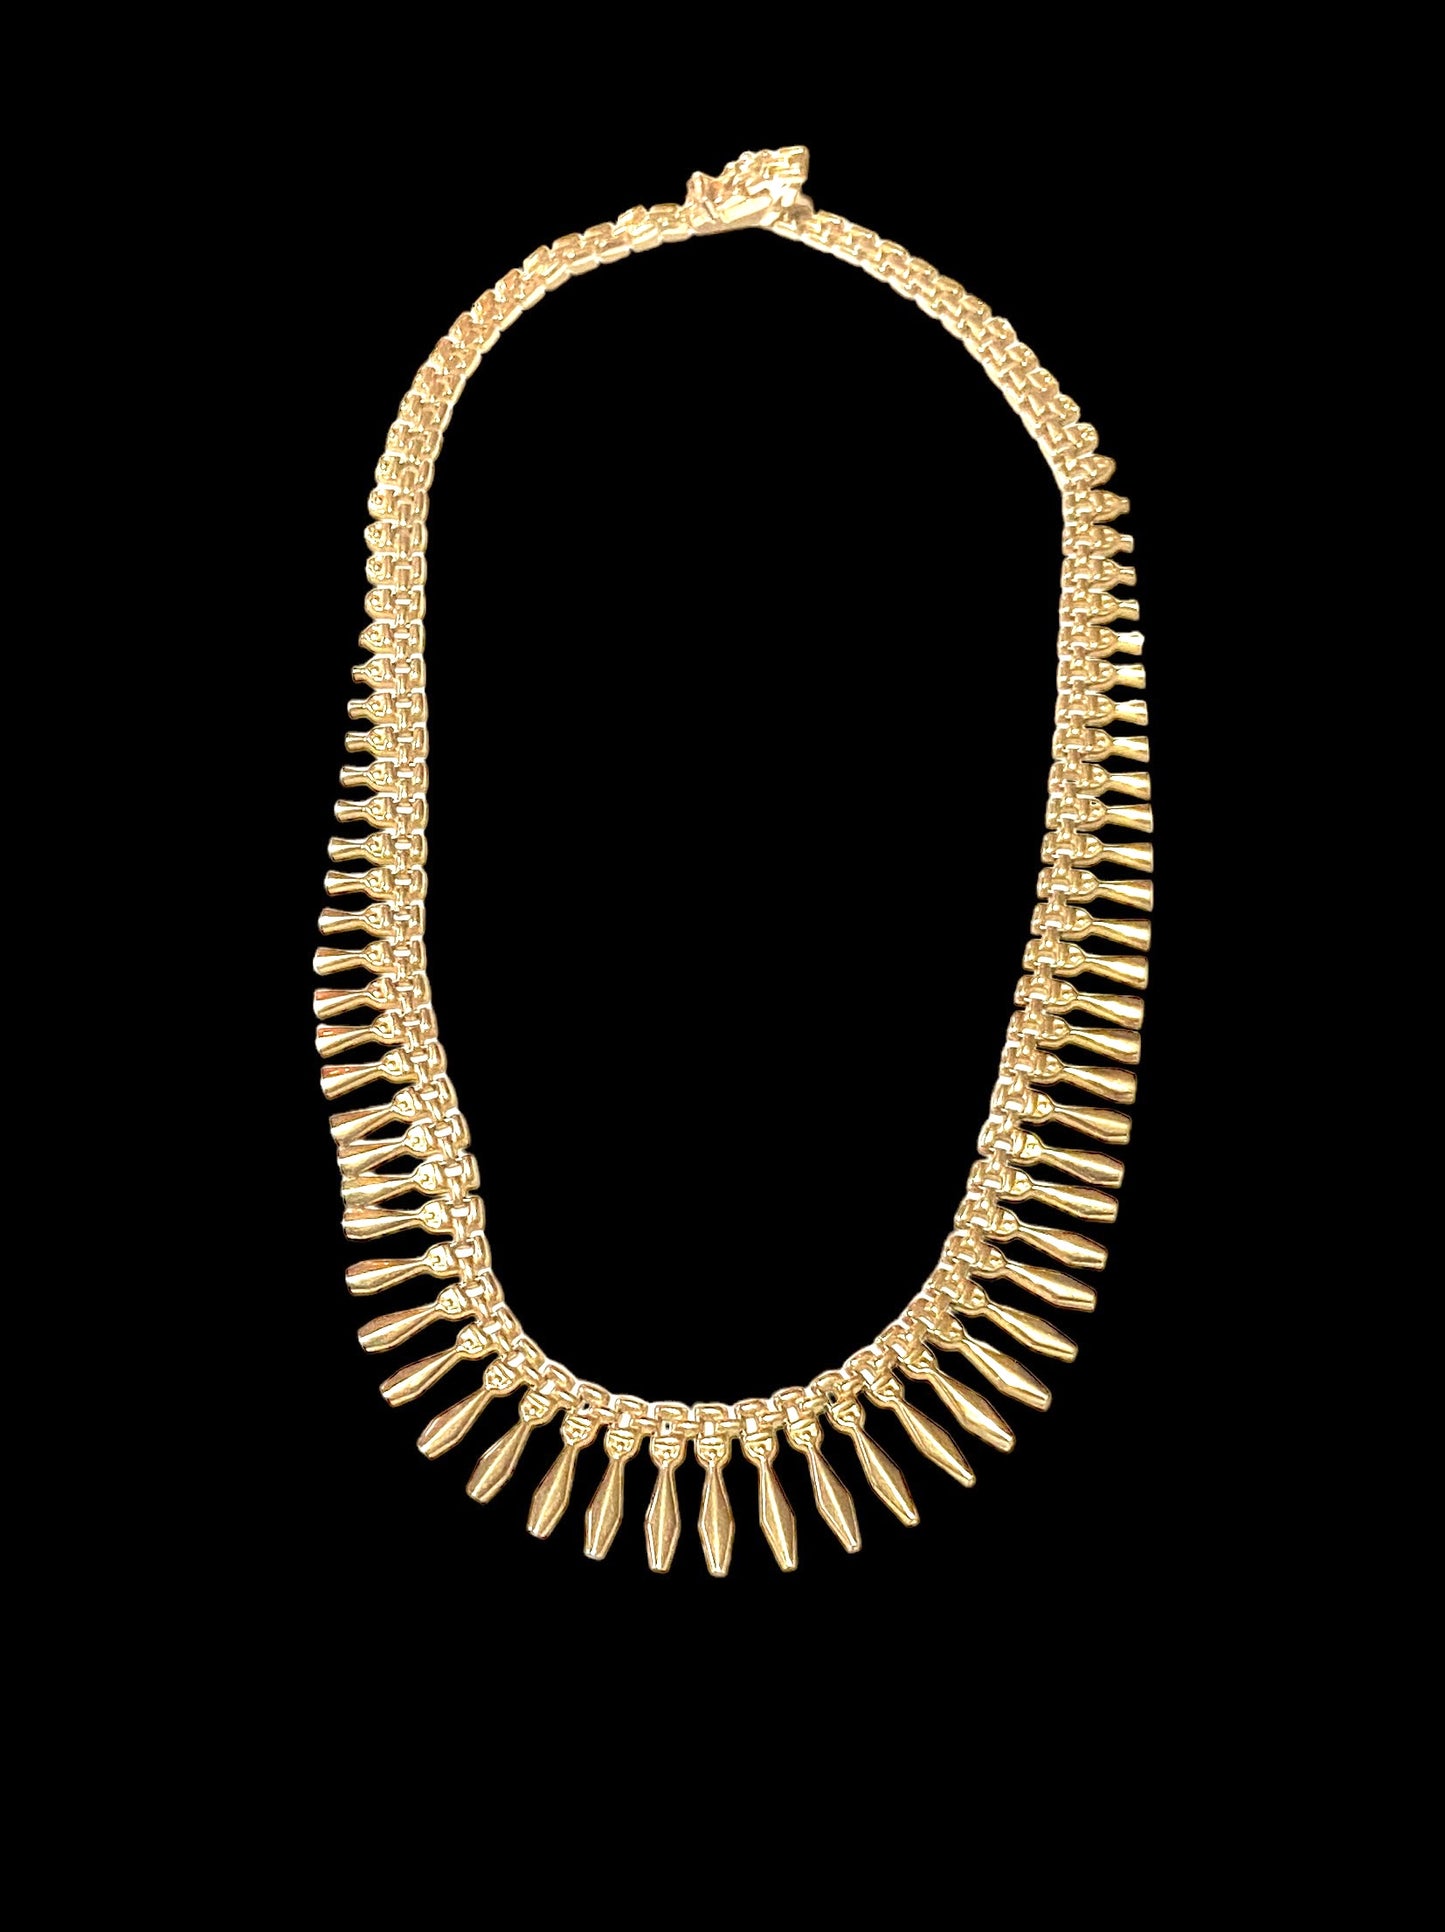 9ct vintage Cleopatra style necklace 19g 16 inches